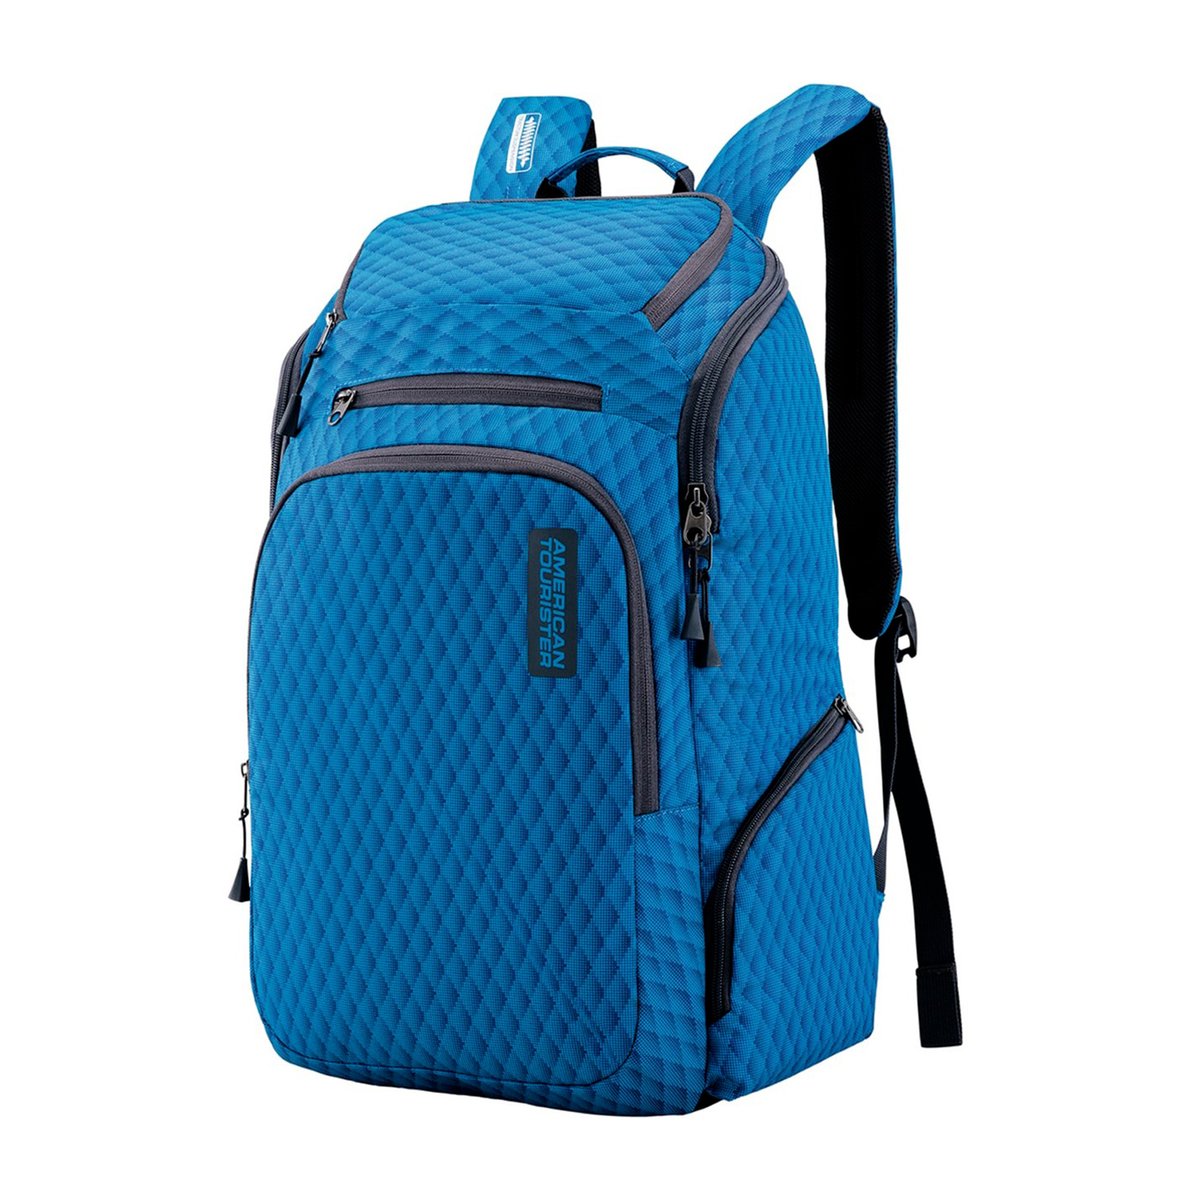 American Tourister Laptop Backpack Acro 003 Blue